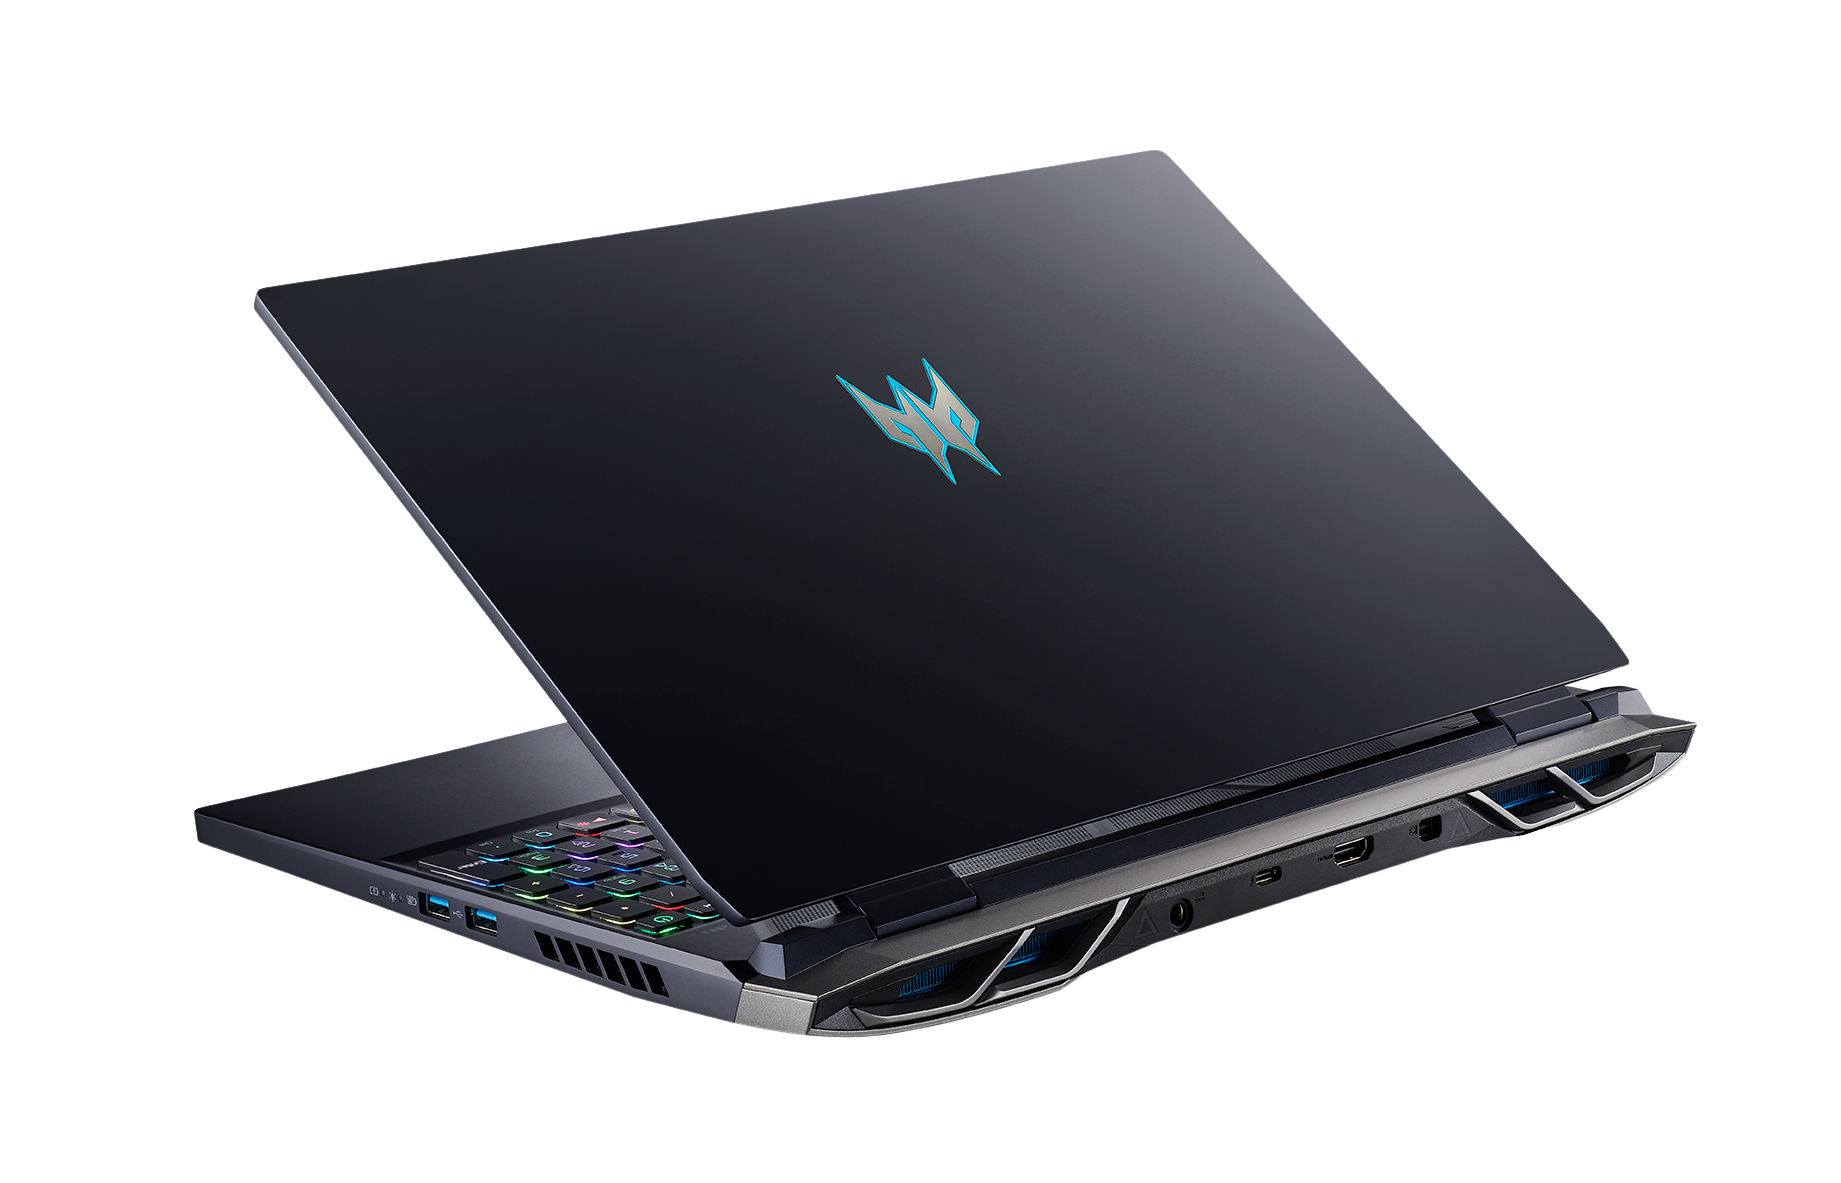 Rent Acer Predator Helios Gaming Laptop - Intel® i7-12700H 16GB - - NVIDIA® GeForce® RTX 3070 from $79.90 per month